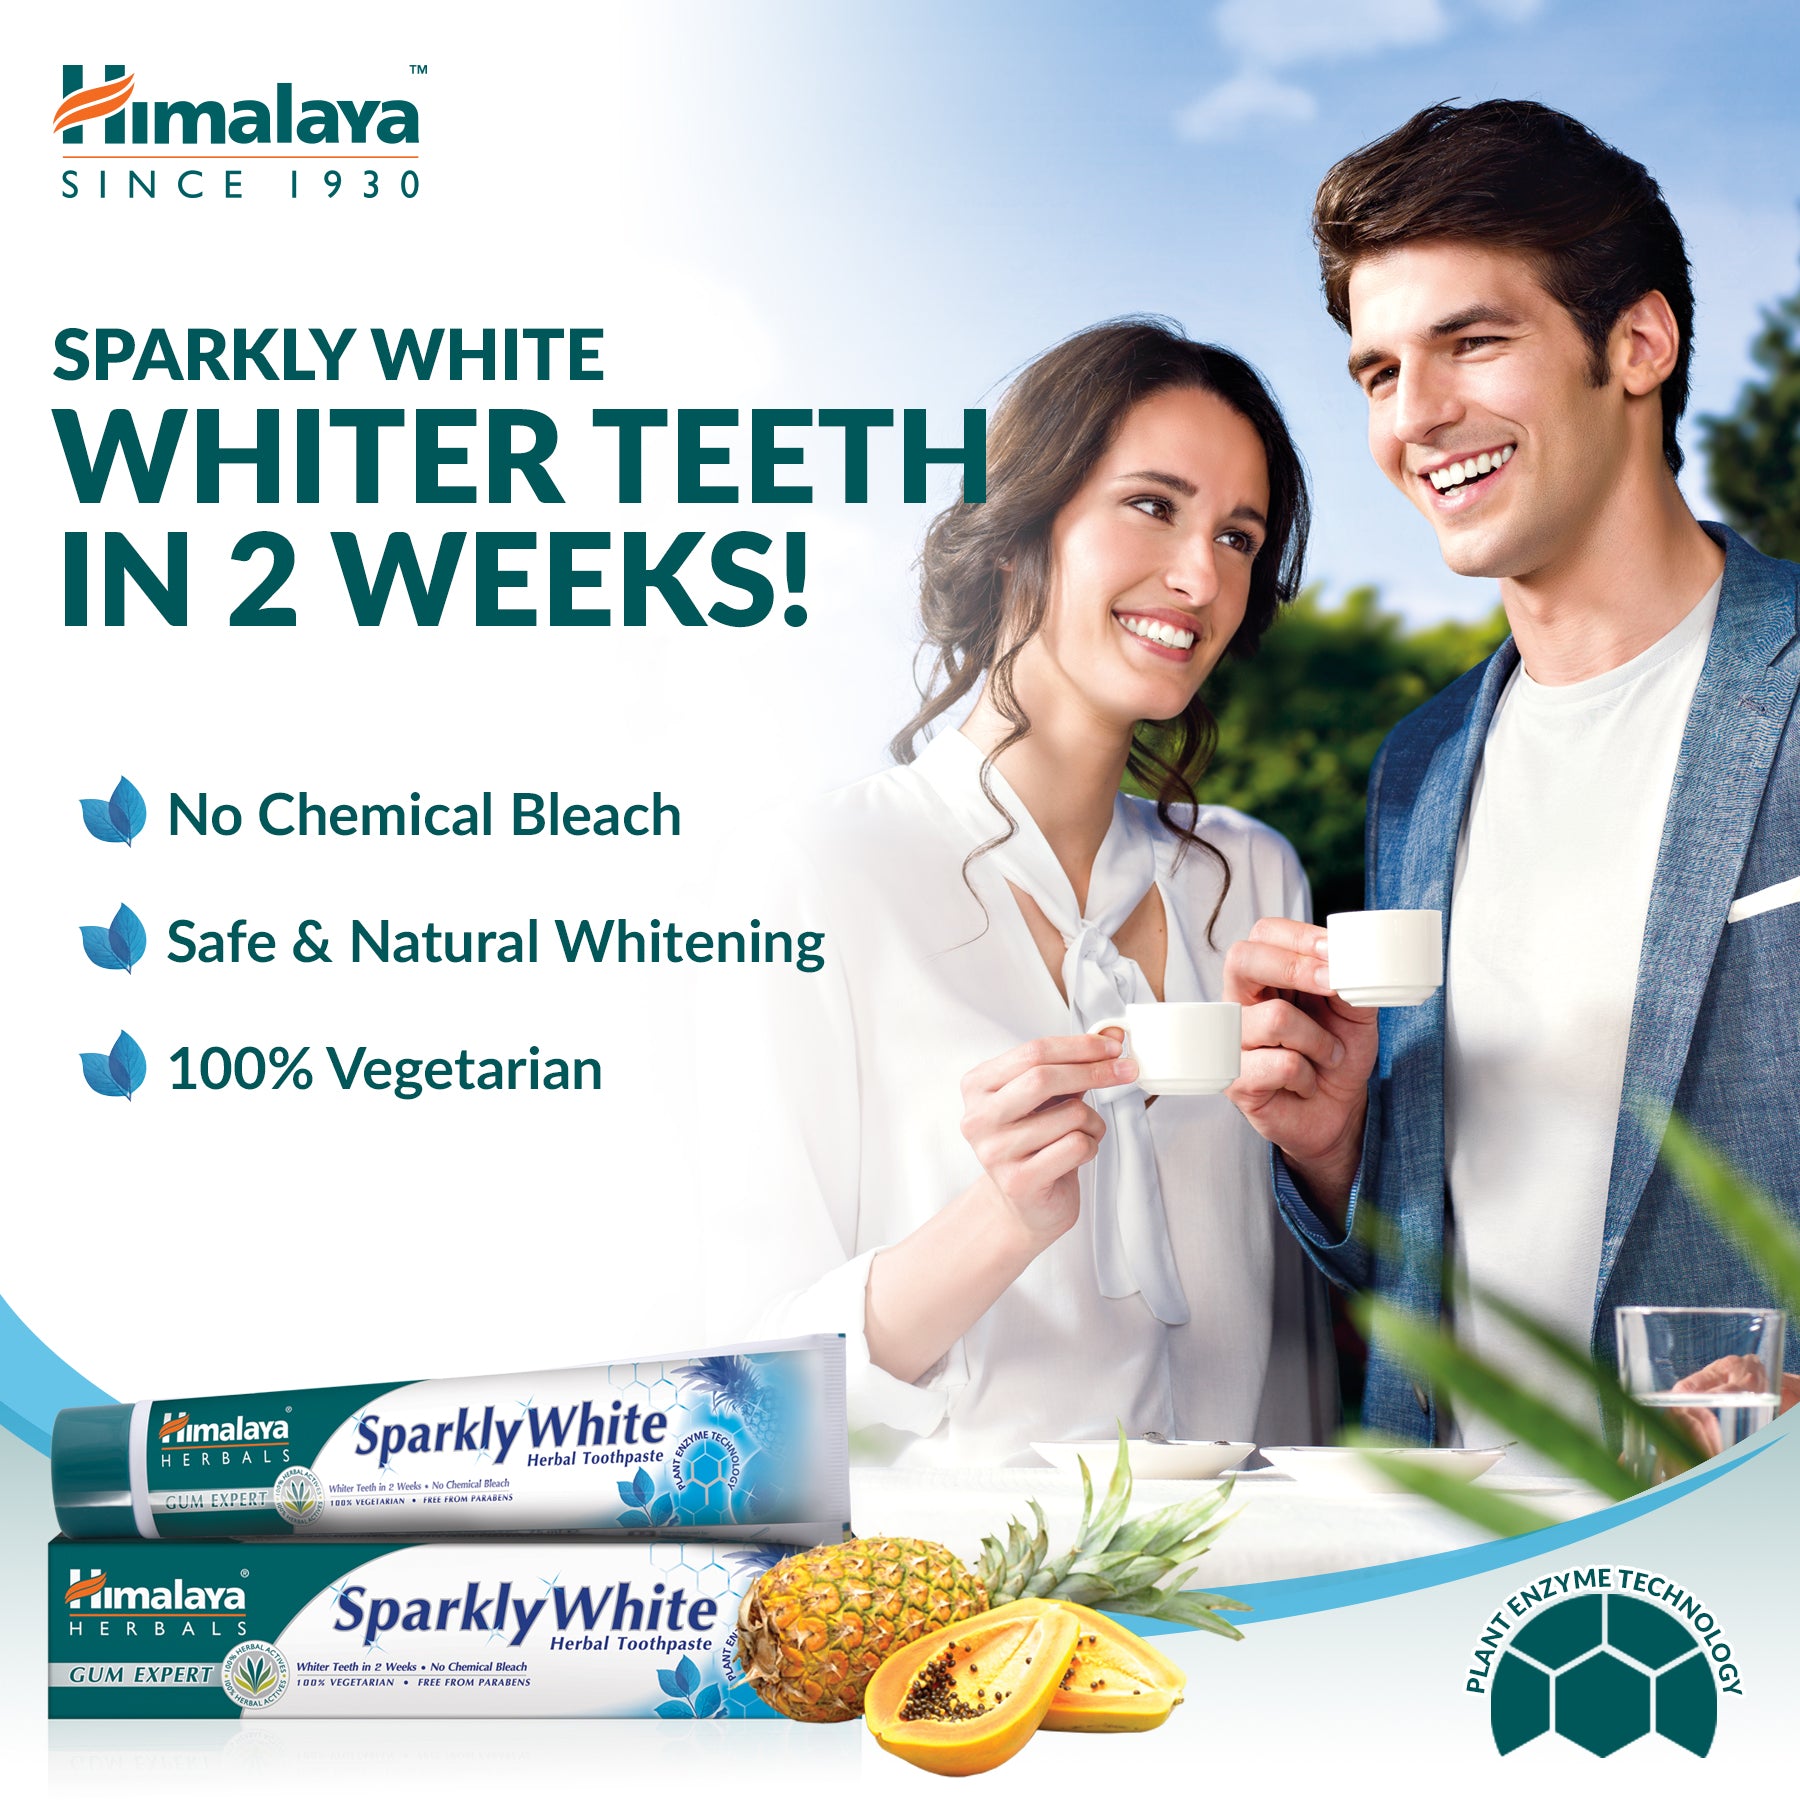 Himalaya Gum Expert Herbal Toothpaste - Sparkly White - 75ml (Pack of 2)